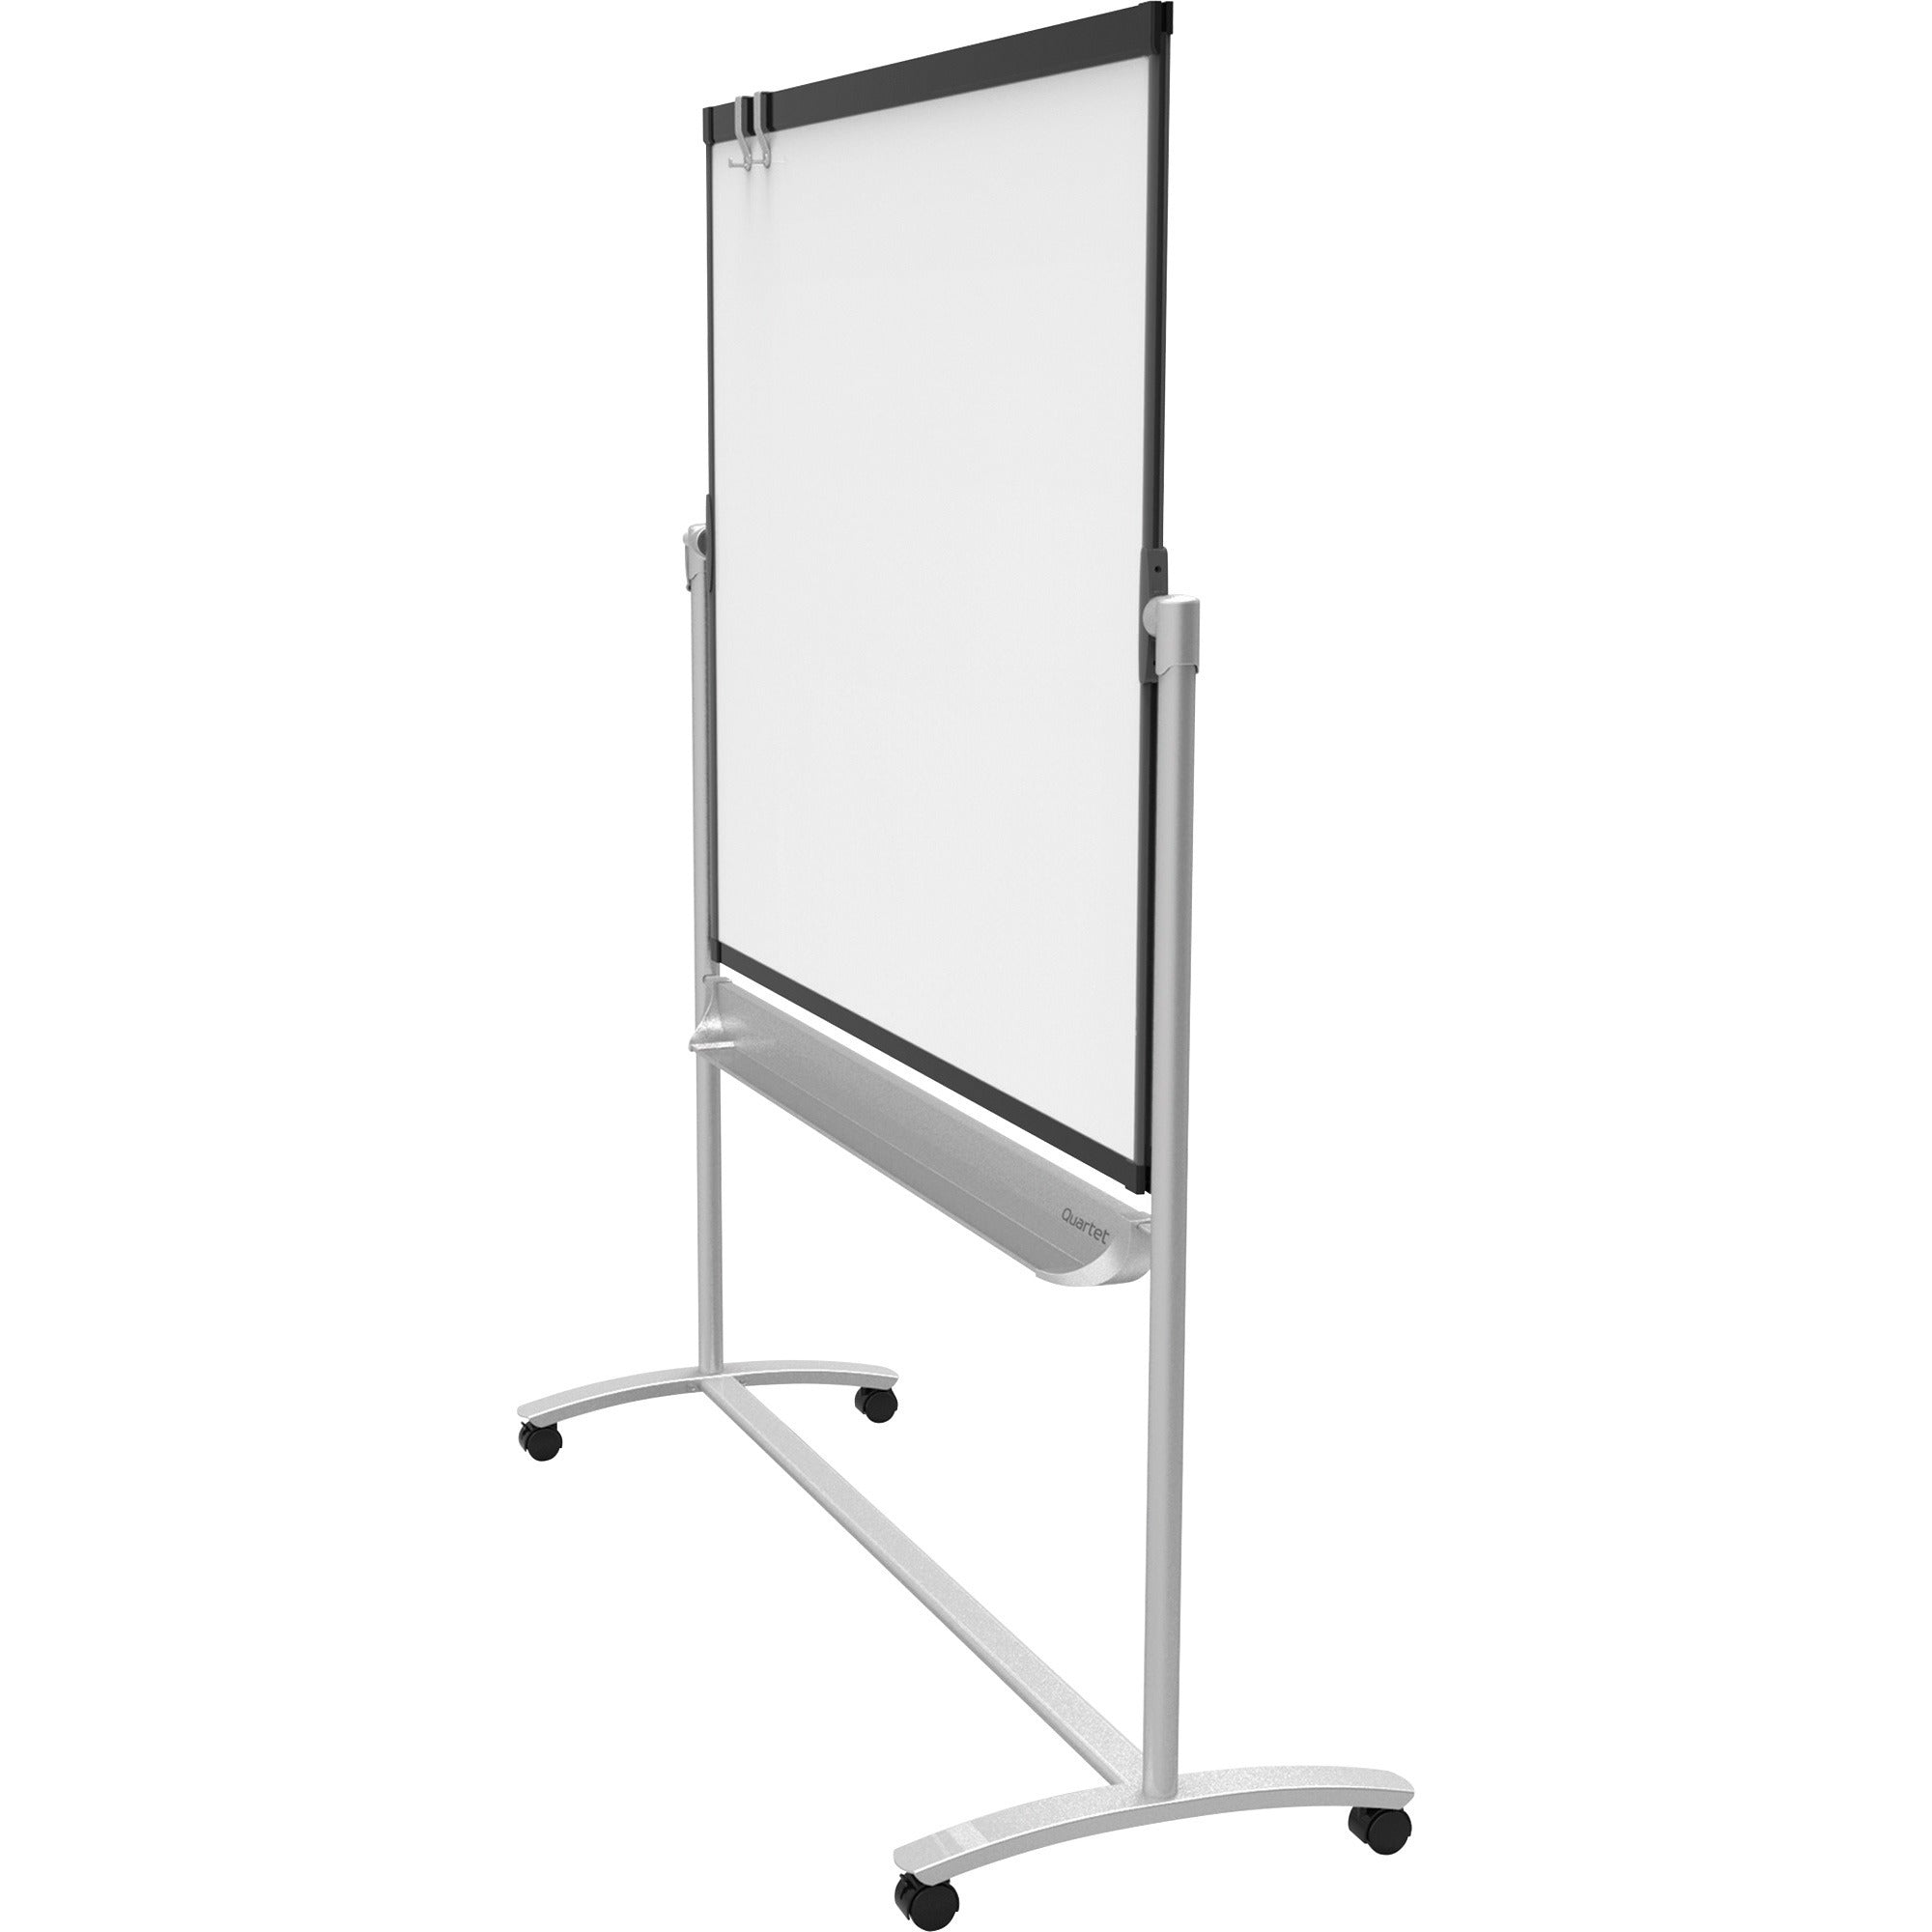 quartet-magnetic-mobile-presentation-easel-48-4-ft-width-x-36-3-ft-height-white-painted-steel-surface-graphite-frame-magnetic-assembly-required-1-each_qrtecm43p2 - 2